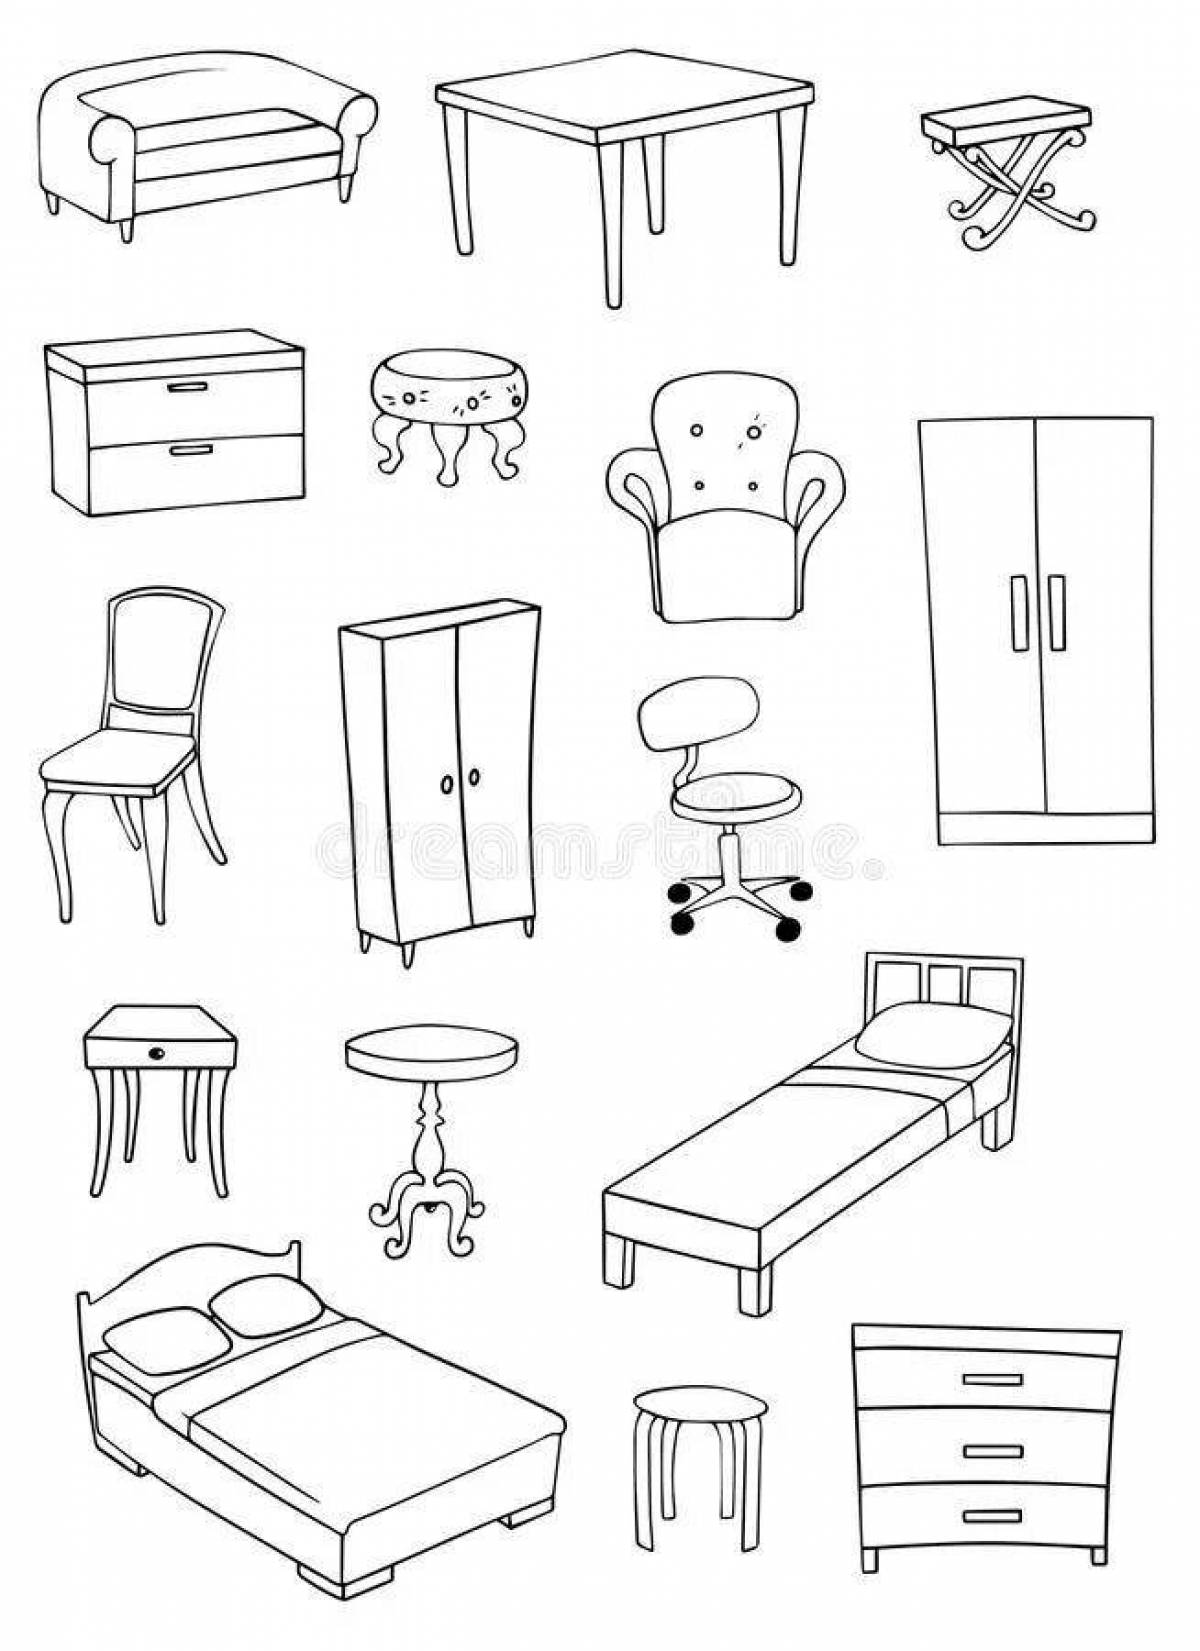 Exciting furniture coloring pages